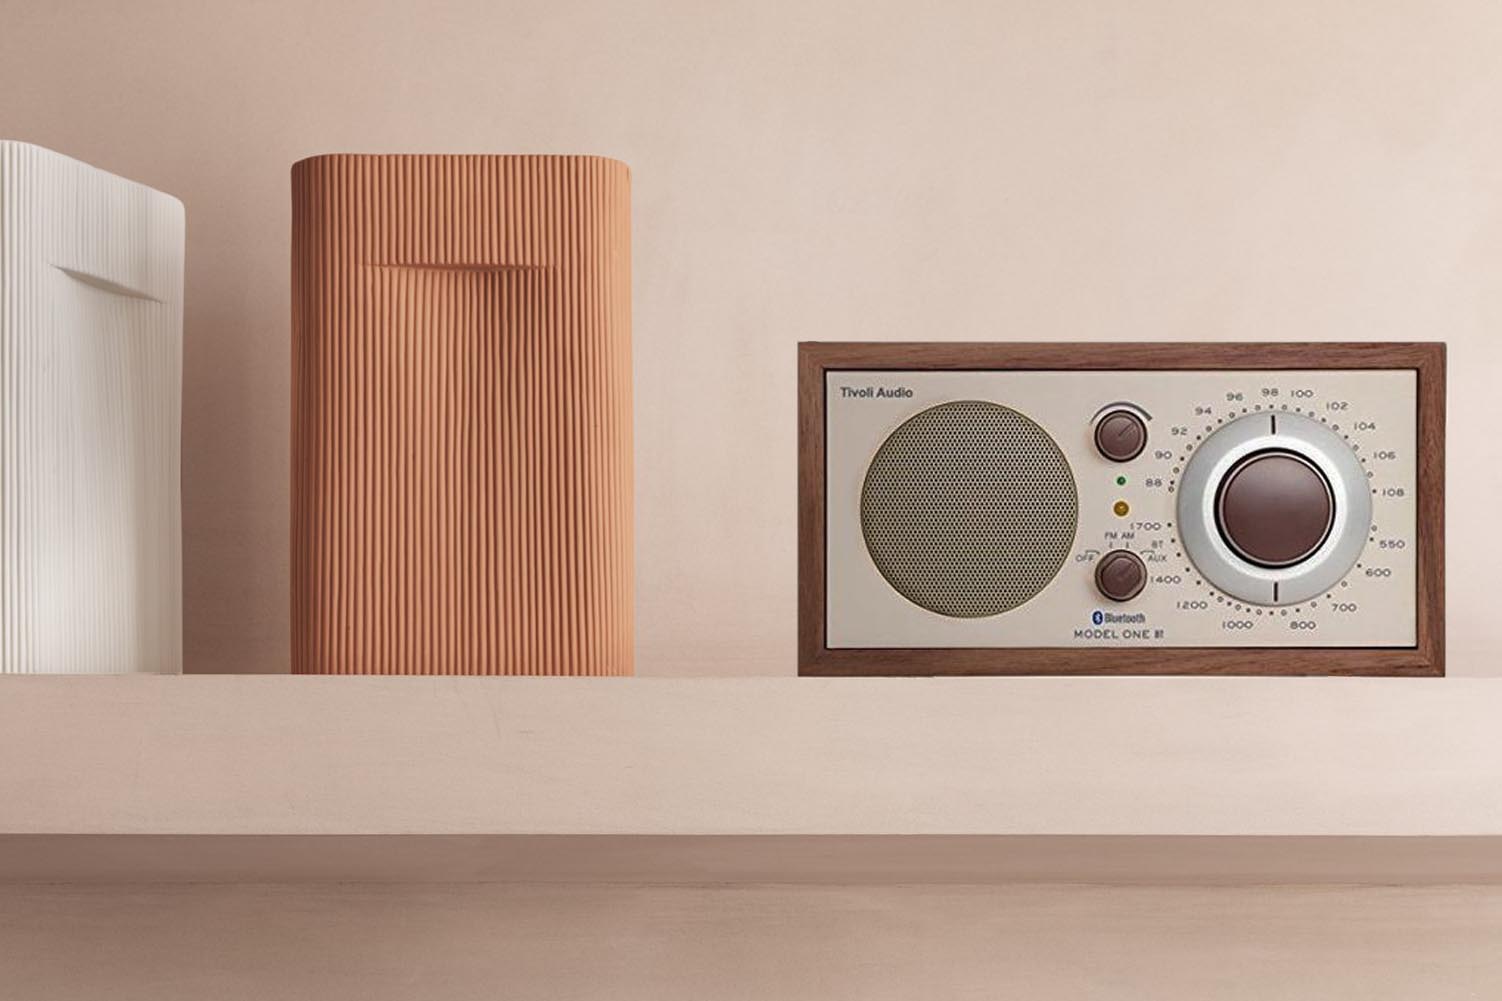 Not Your Grandfather’s AM/FM Radio: High Design Meets Lo-Fi